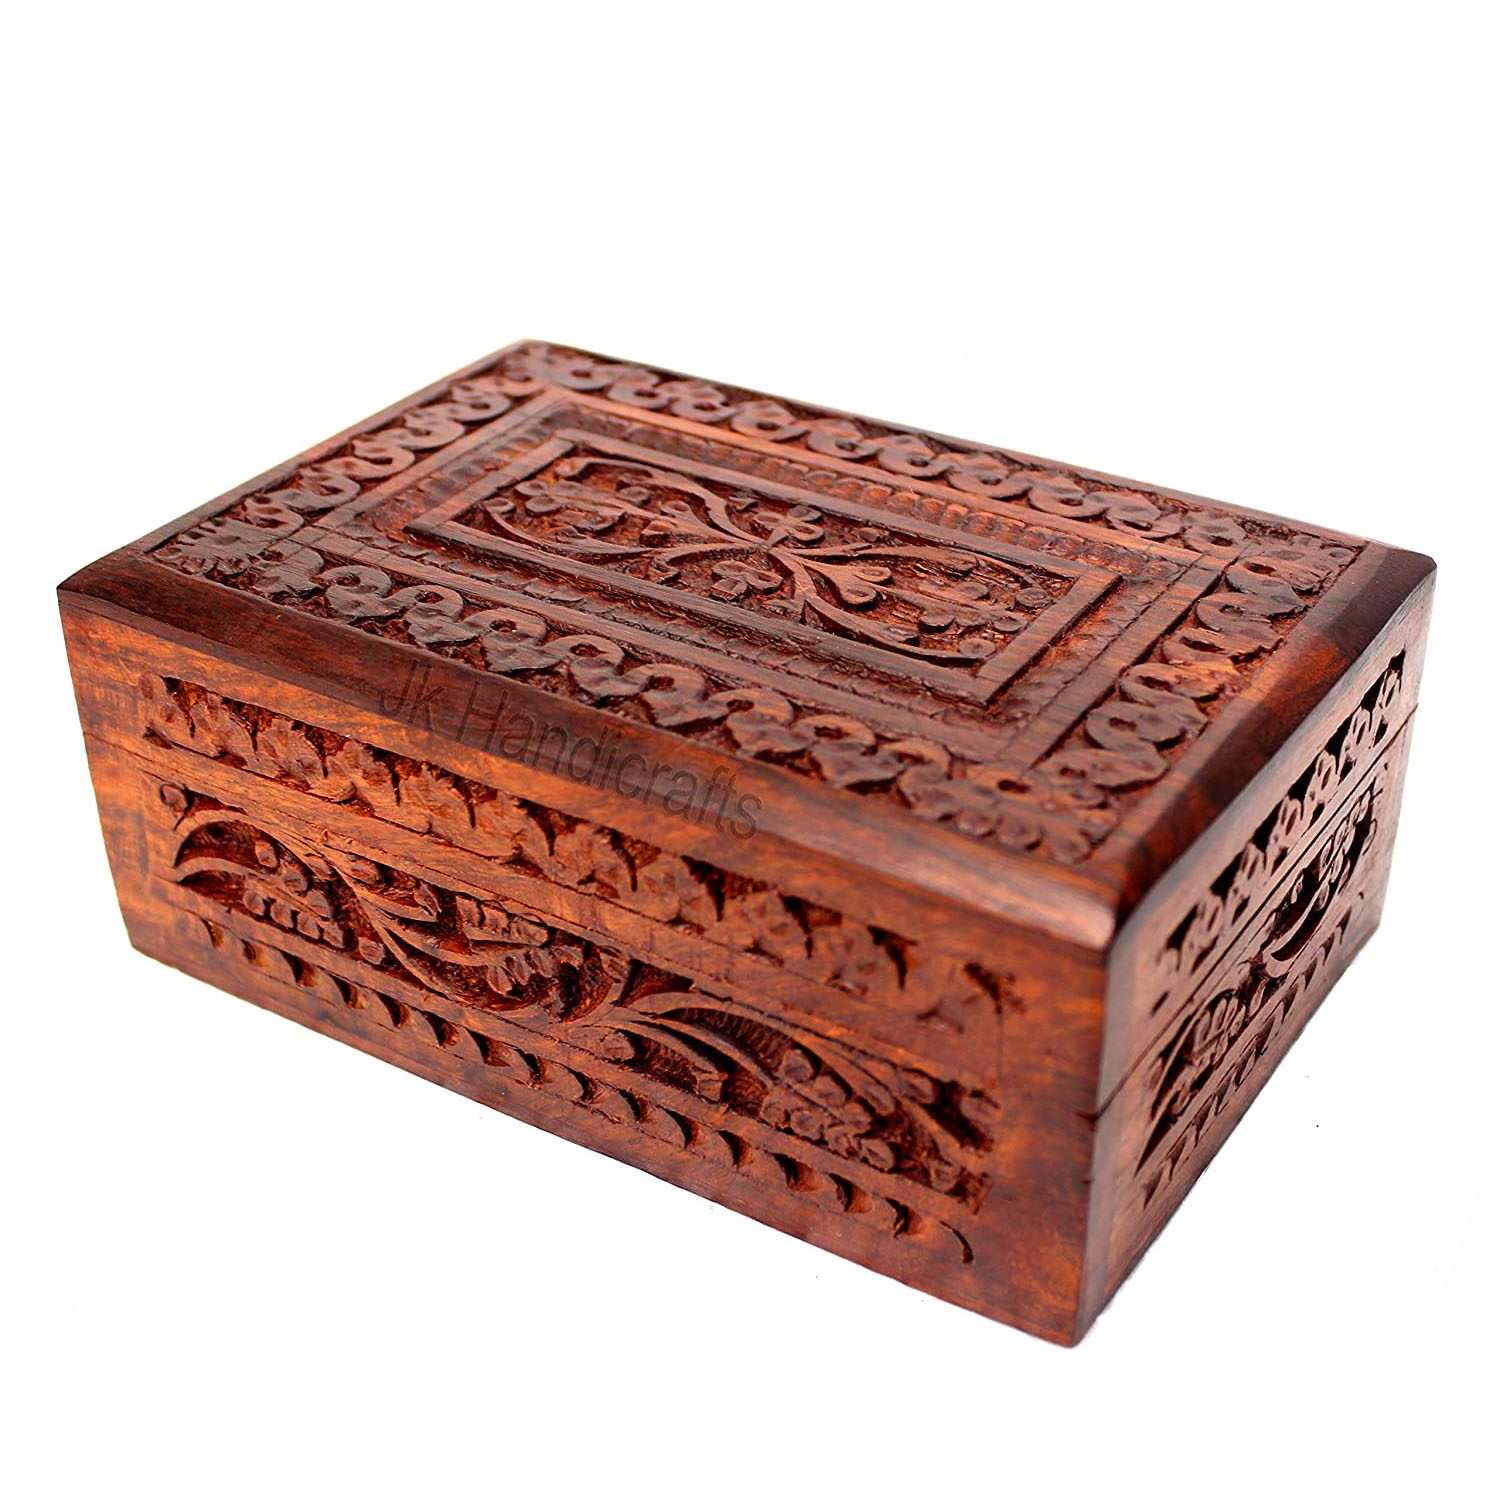 Handmade Wooden Jewellery Box for Women | Wood Jewel Organizer | Hand Carved with Intricate Carvings | Gift Items |